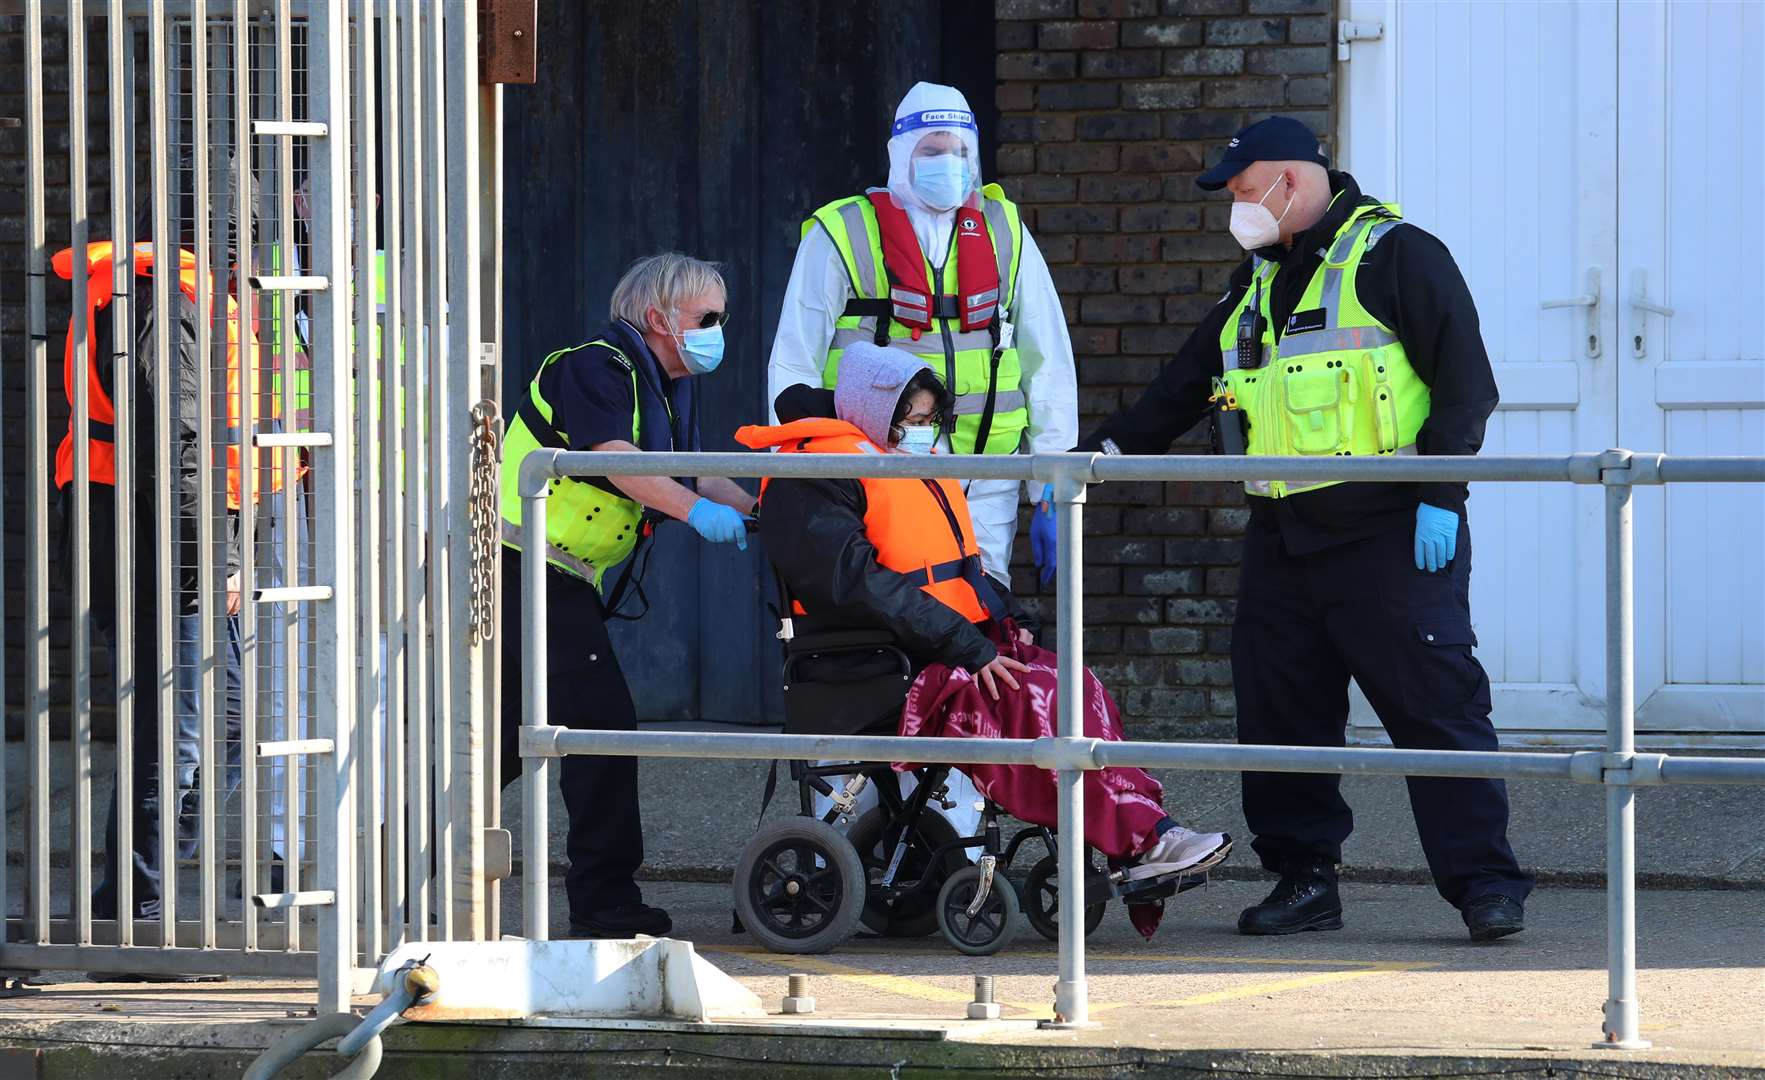 The Home Office said all adults who arrived in Dover were tested for Covid-19 and one tested positive (Gareth Fuller/PA) 